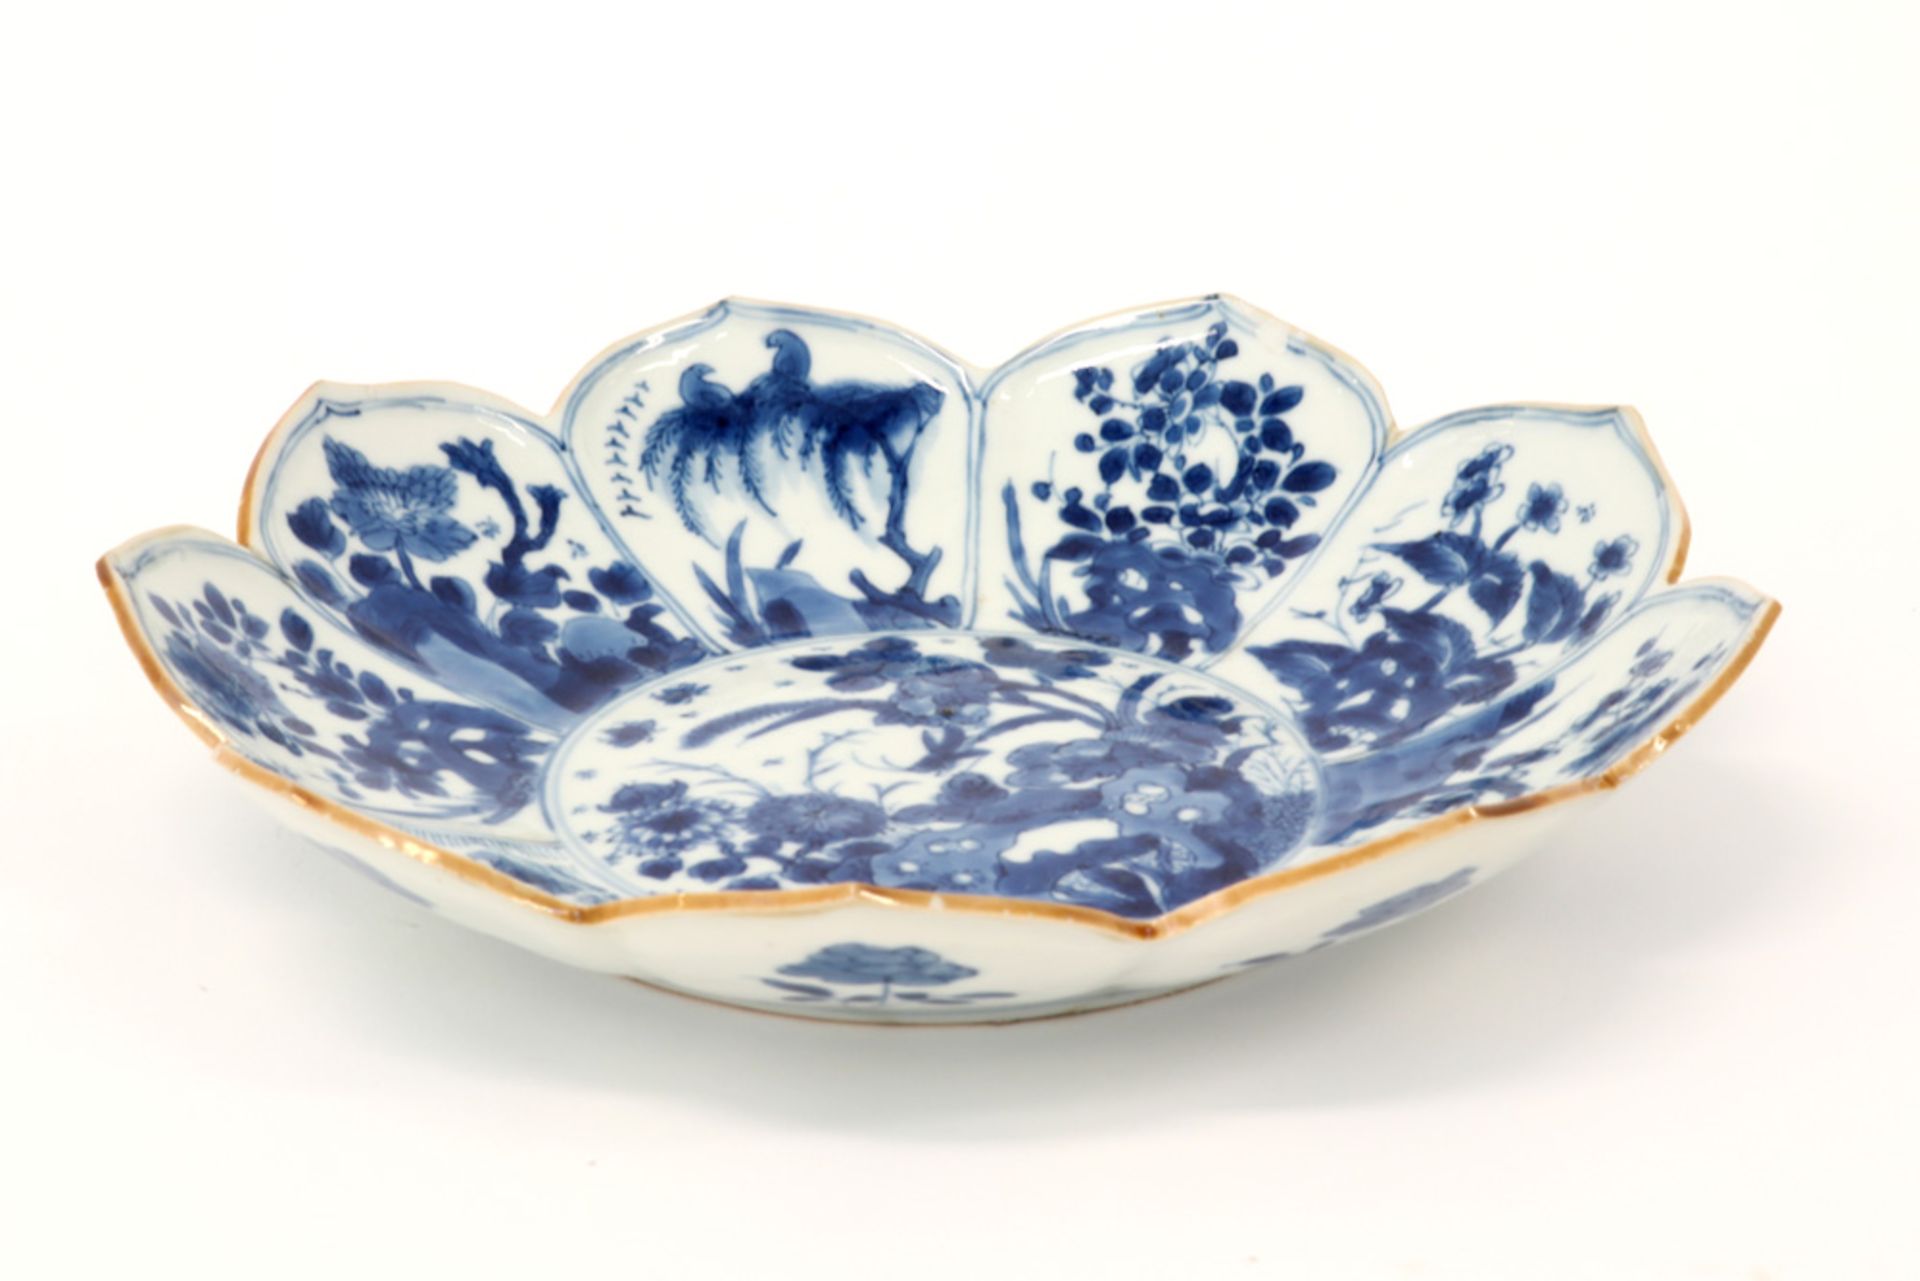 17th/18th Cent. lotusflower-shaped Chinese Kang Hsi period dish in porcelain with a blue-white decor - Image 2 of 3